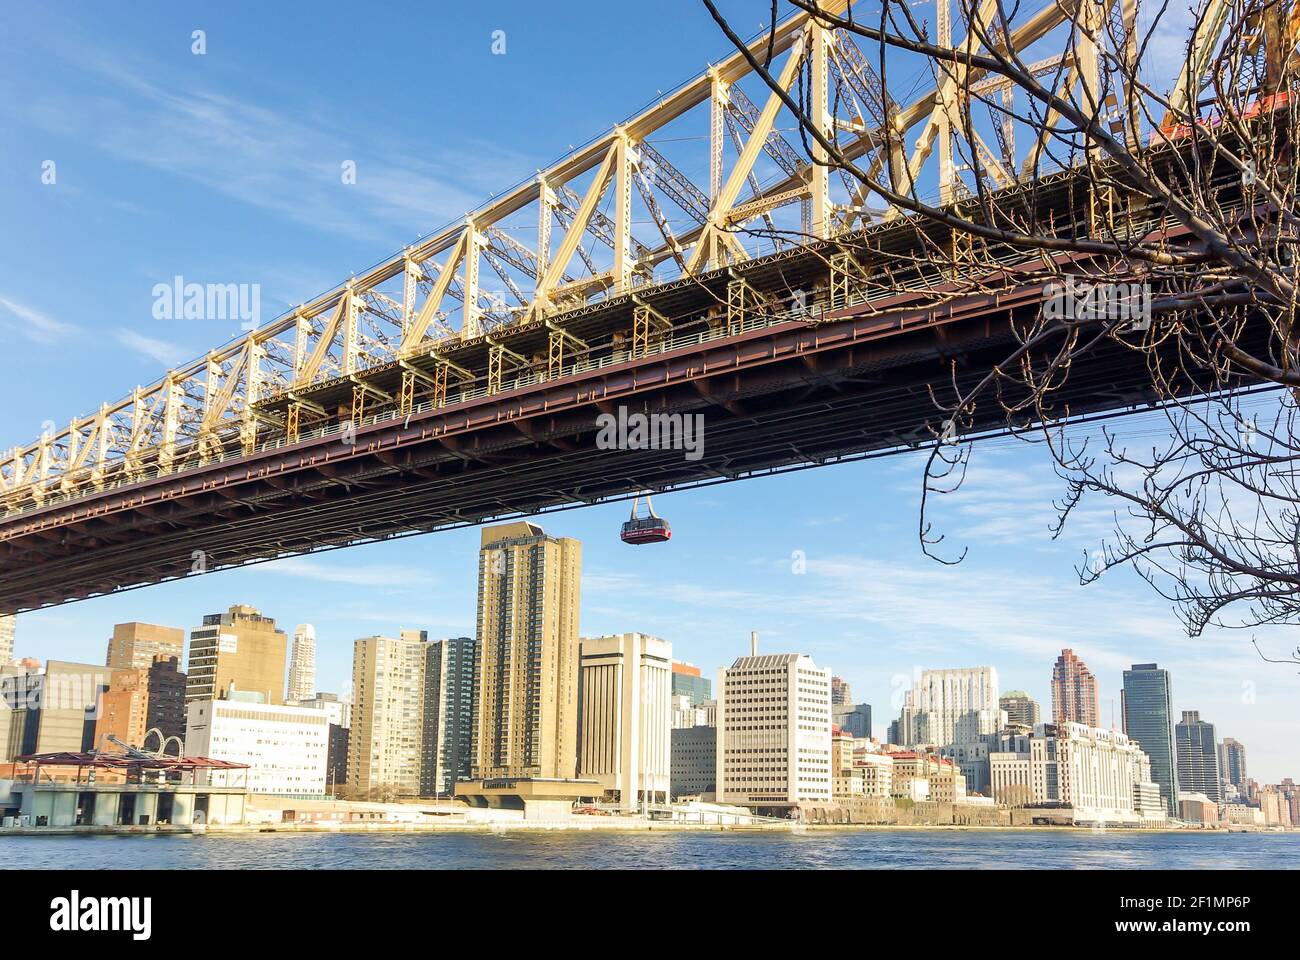 The Queensborough Bridge and the cable car over the East River and Roosevelt Island across from Manhattan in New York, USA Stock Photo